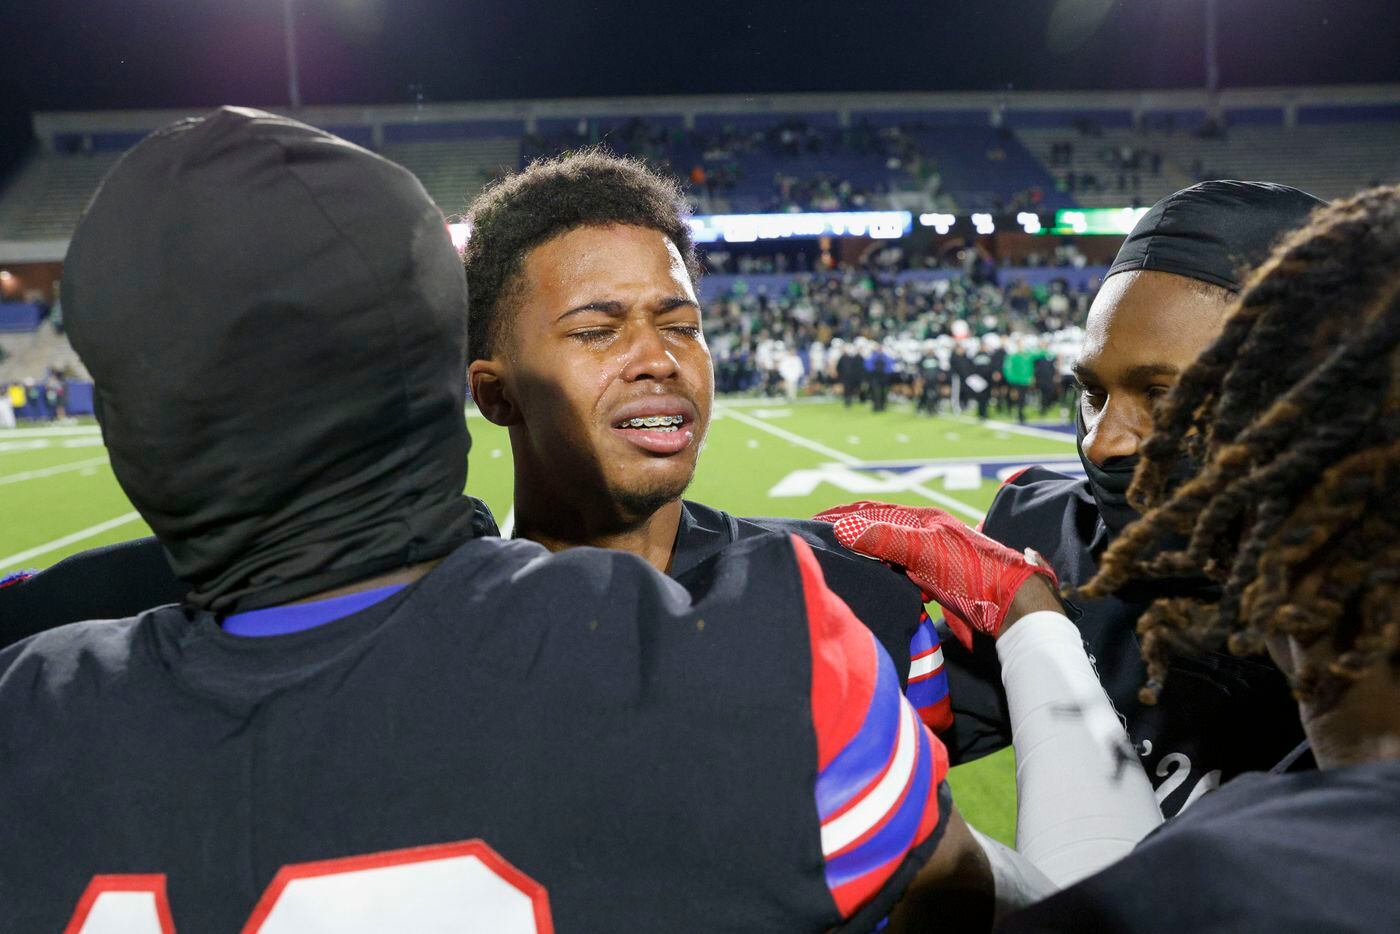 Duncanville quarterback Solomon Jones (3) is overcome with emotion after defeating Southlake Carroll in their Class 6A Division I state semifinal playoff game at McKinney ISD Stadium in McKinney, Texas, Saturday, Dec. 11, 2021. Duncanville defeated Southlake Carroll 35-9. (Elias Valverde II/The Dallas Morning News)